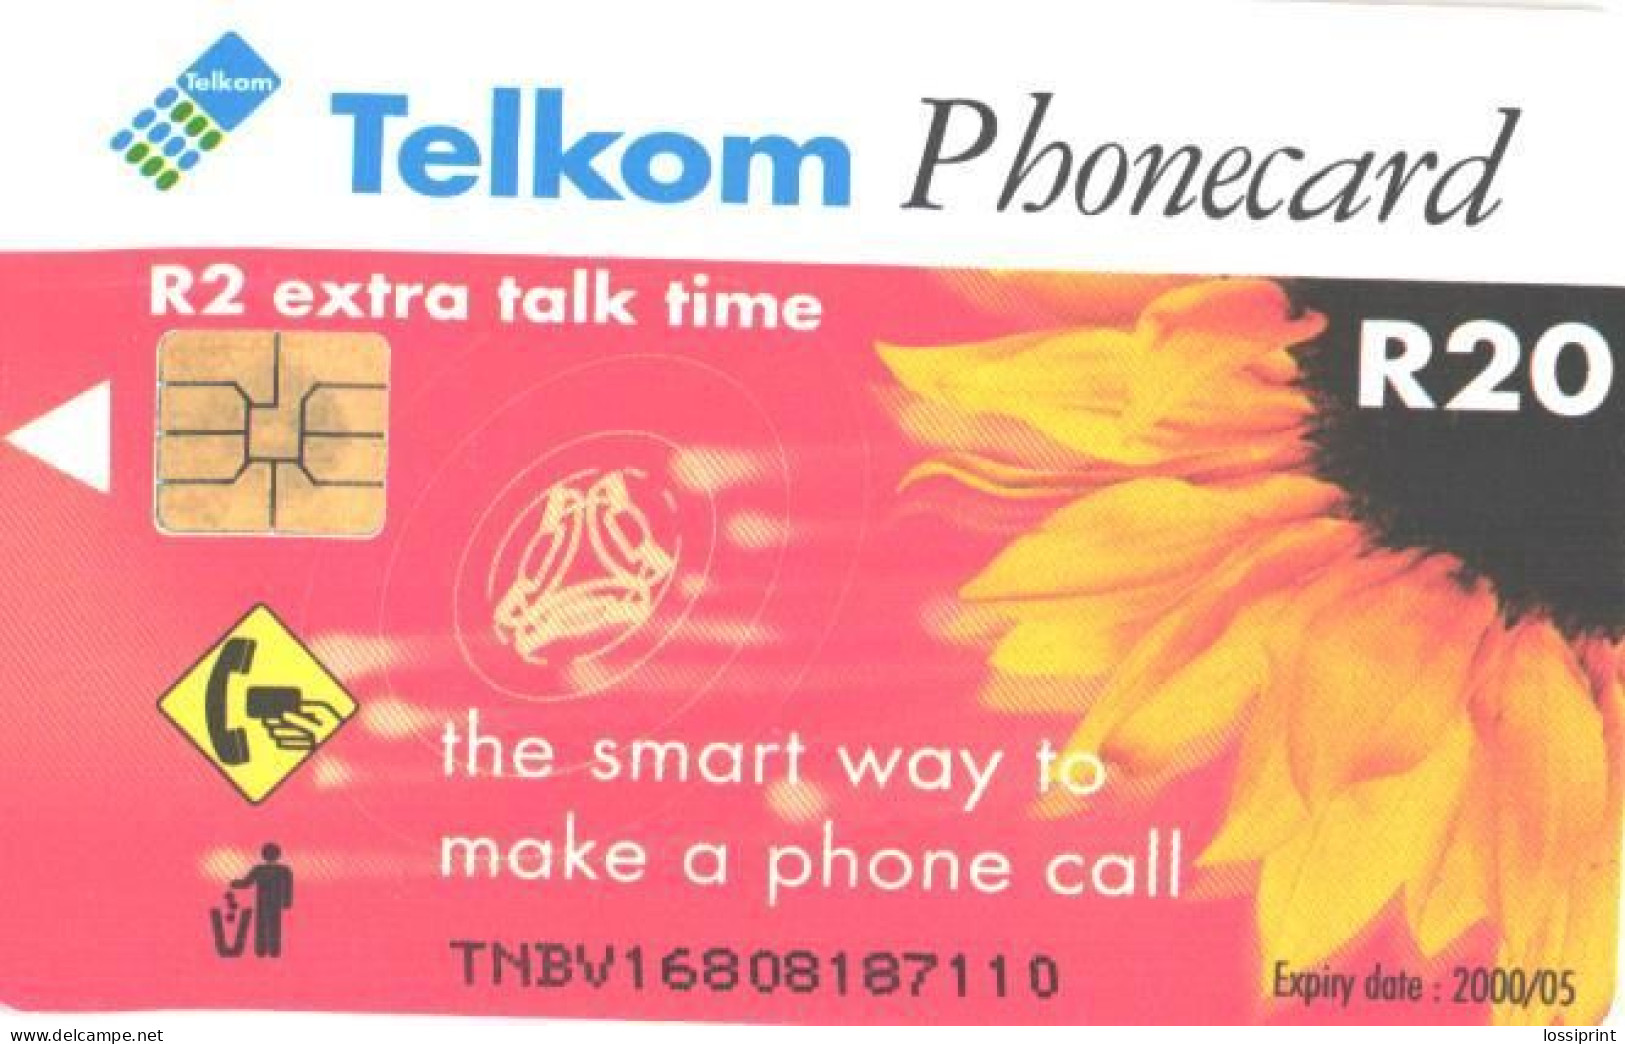 South Africa:Used Phonecard, Telkom, R 20, Puzzle Card, 2000 - Puzzles